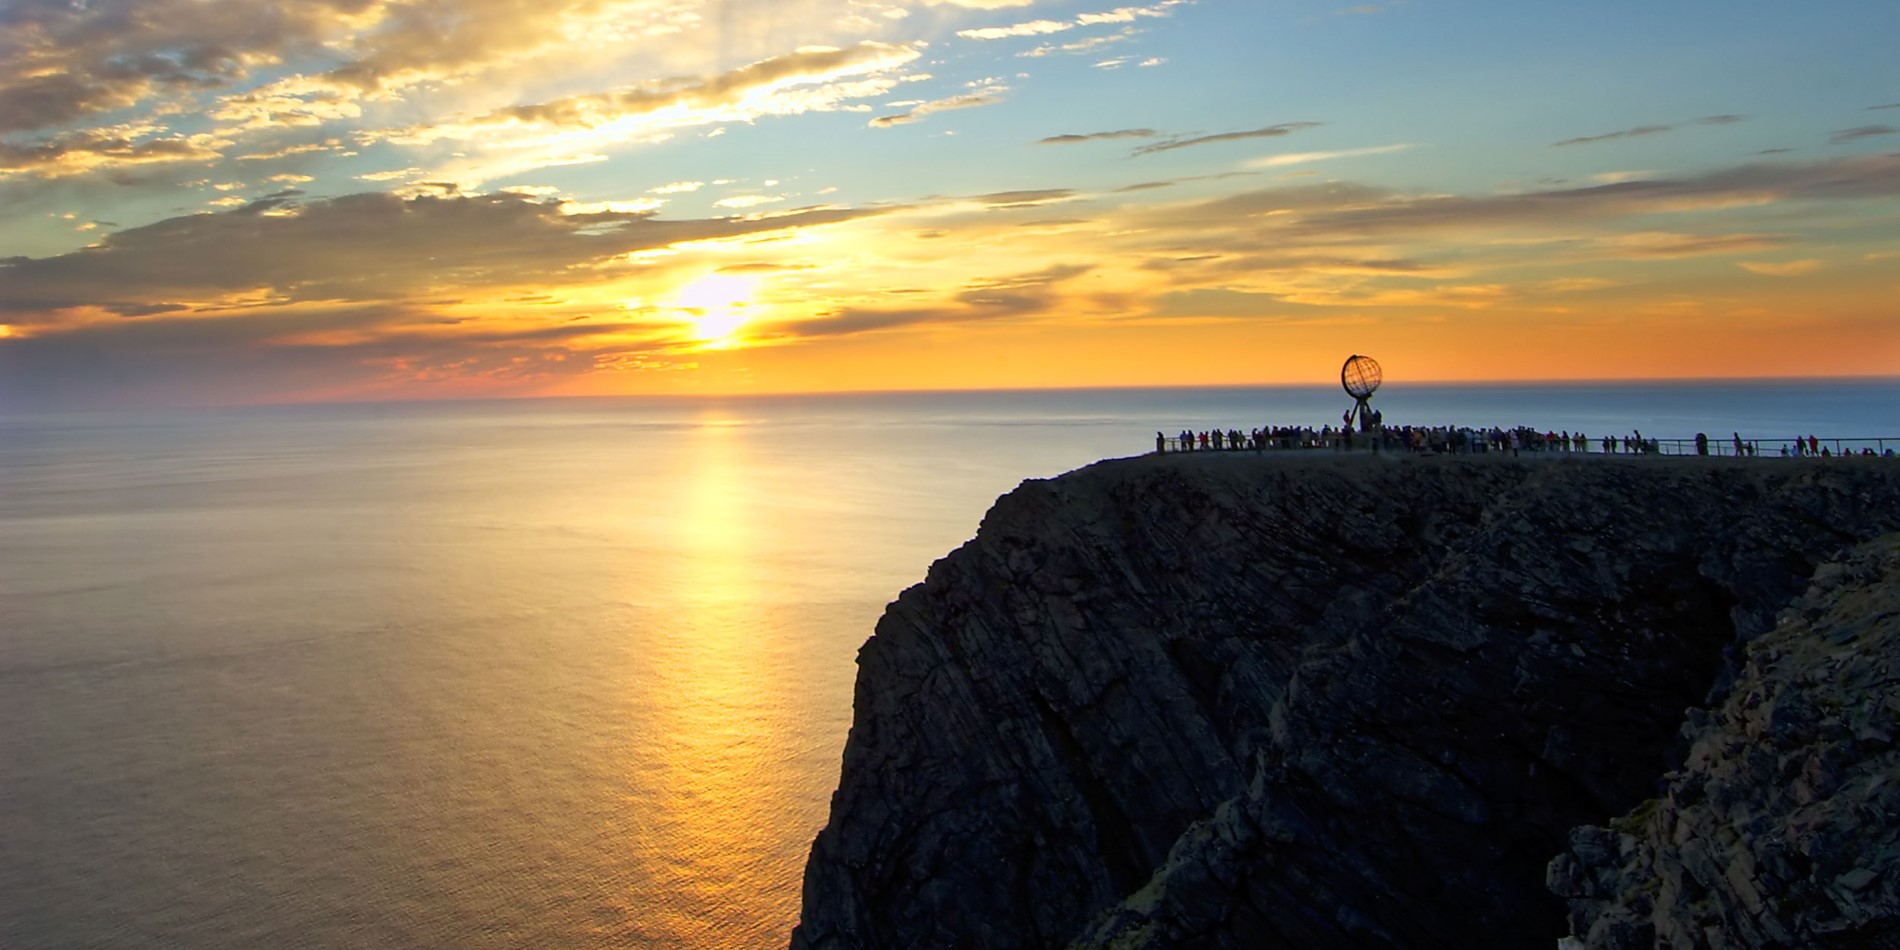 The North Cape, Europe’s most Northern corner